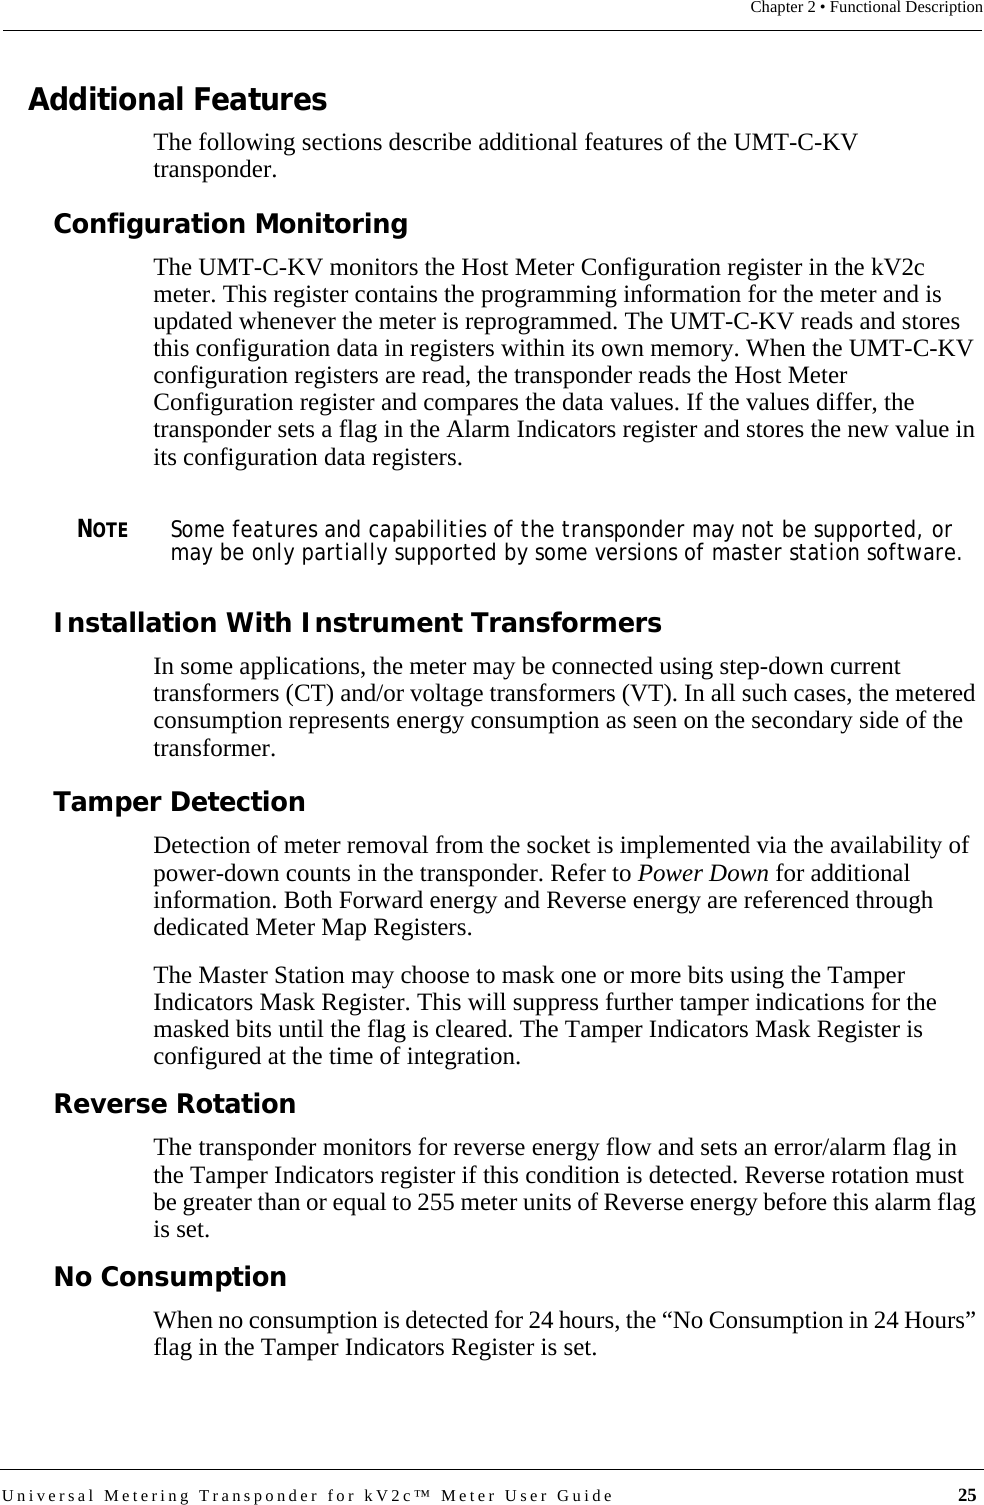 Universal Metering Transponder for kV2c™ Meter User Guide  25Chapter 2 • Functional DescriptionAdditional FeaturesThe following sections describe additional features of the UMT-C-KV transponder.Configuration MonitoringThe UMT-C-KV monitors the Host Meter Configuration register in the kV2c meter. This register contains the programming information for the meter and is updated whenever the meter is reprogrammed. The UMT-C-KV reads and stores this configuration data in registers within its own memory. When the UMT-C-KV configuration registers are read, the transponder reads the Host Meter Configuration register and compares the data values. If the values differ, the transponder sets a flag in the Alarm Indicators register and stores the new value in its configuration data registers.NOTESome features and capabilities of the transponder may not be supported, or may be only partially supported by some versions of master station software.Installation With Instrument TransformersIn some applications, the meter may be connected using step-down current transformers (CT) and/or voltage transformers (VT). In all such cases, the metered consumption represents energy consumption as seen on the secondary side of the transformer. Tamper DetectionDetection of meter removal from the socket is implemented via the availability of power-down counts in the transponder. Refer to Power Down for additional information. Both Forward energy and Reverse energy are referenced through dedicated Meter Map Registers.The Master Station may choose to mask one or more bits using the Tamper Indicators Mask Register. This will suppress further tamper indications for the masked bits until the flag is cleared. The Tamper Indicators Mask Register is configured at the time of integration.Reverse RotationThe transponder monitors for reverse energy flow and sets an error/alarm flag in the Tamper Indicators register if this condition is detected. Reverse rotation must be greater than or equal to 255 meter units of Reverse energy before this alarm flag is set.No ConsumptionWhen no consumption is detected for 24 hours, the “No Consumption in 24 Hours” flag in the Tamper Indicators Register is set.